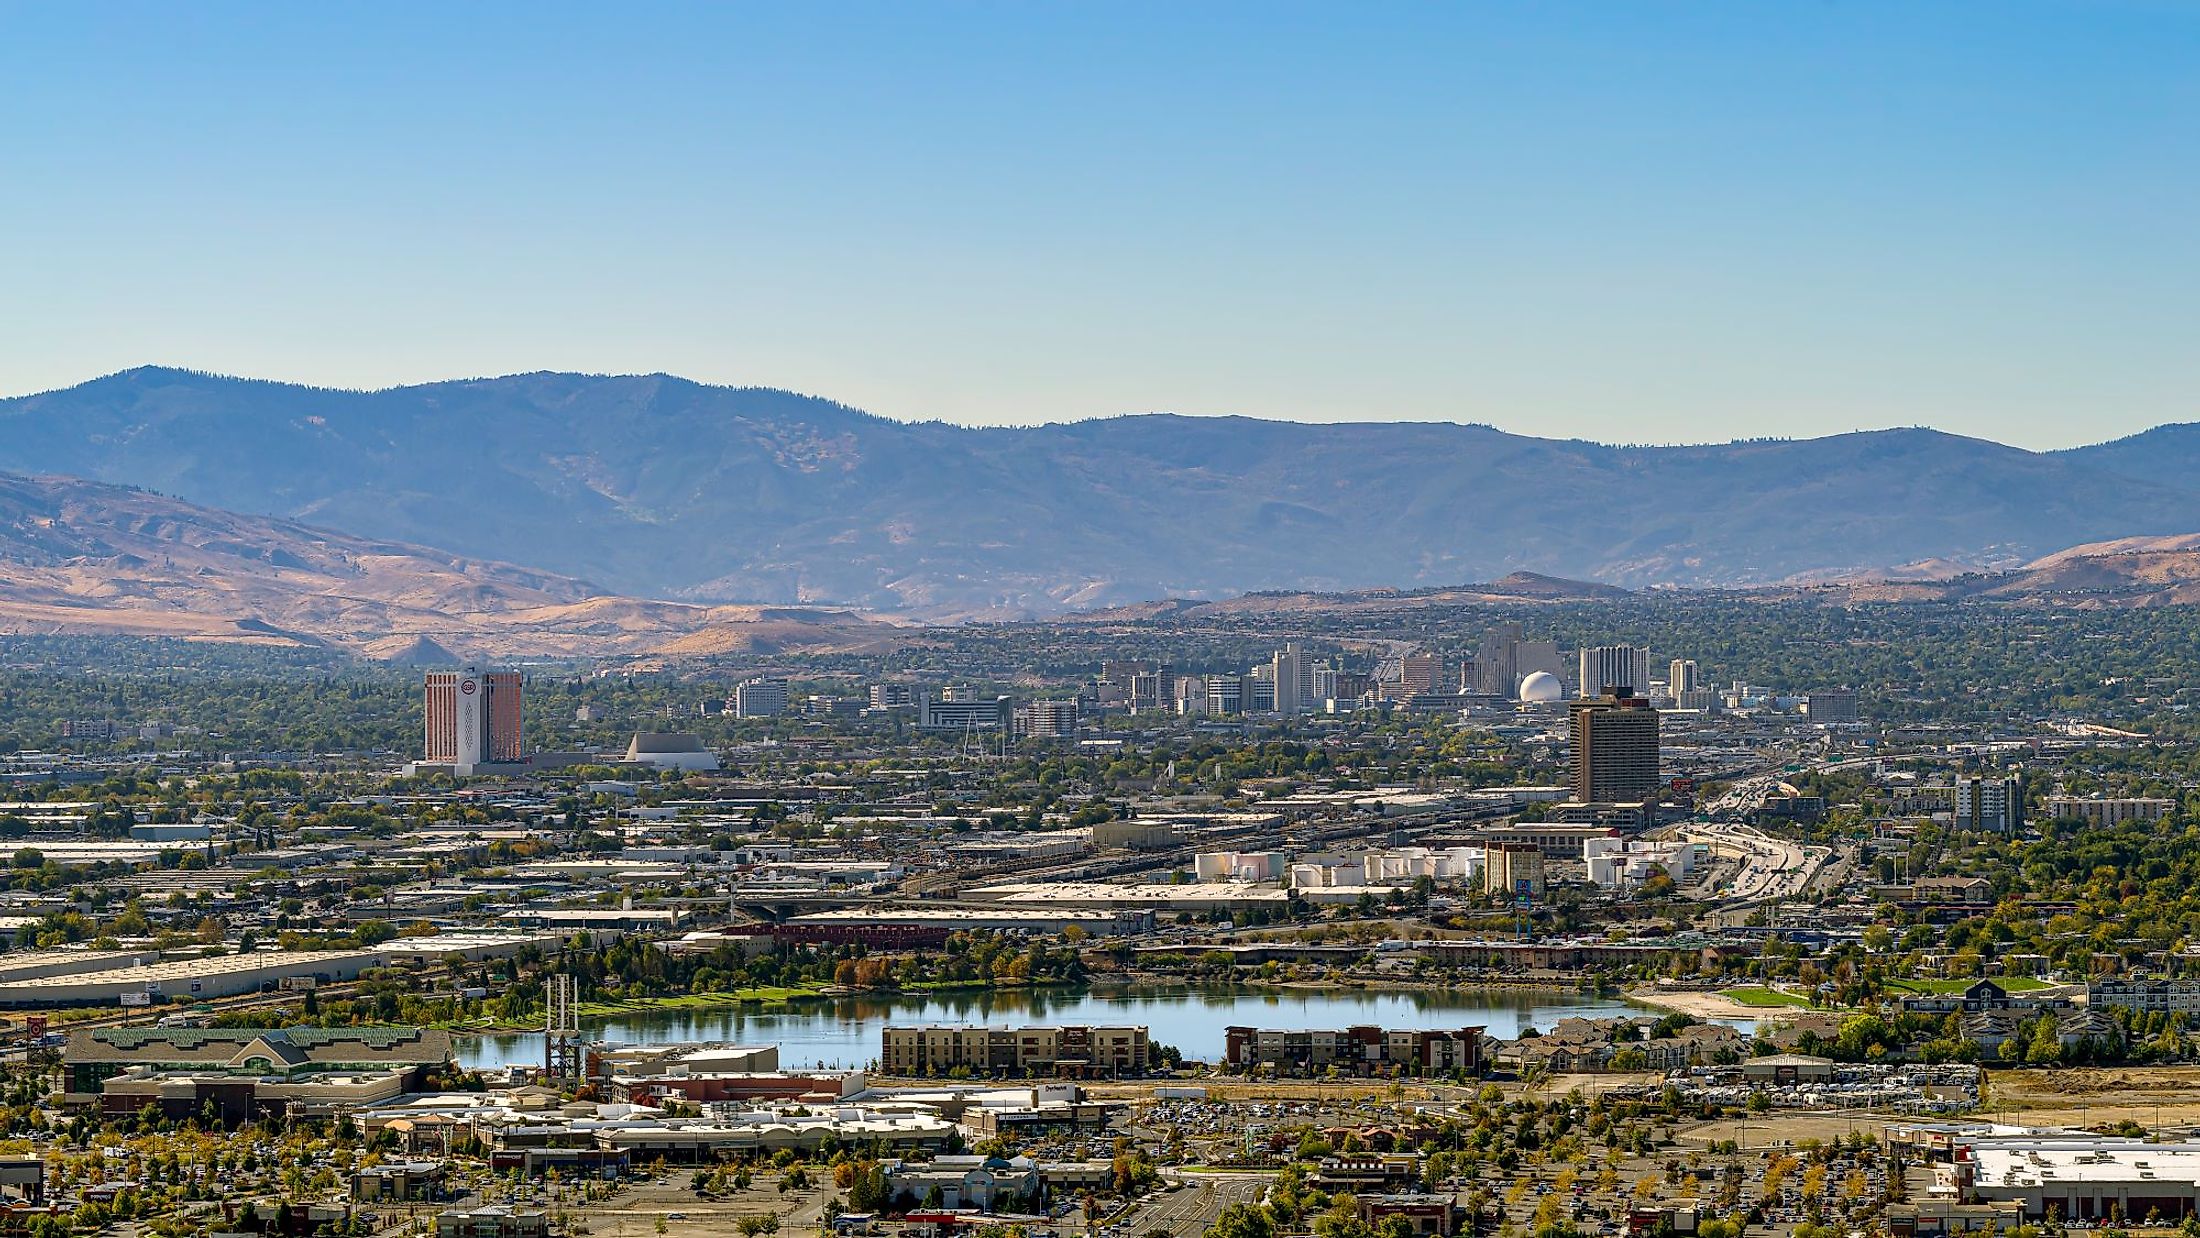 Reno-Sparks cityscape as seen from the East looking West with hotels, casinos and many other businesses and industry on a hazy autumn day. Editorial credit: Gchapel / Shutterstock.com